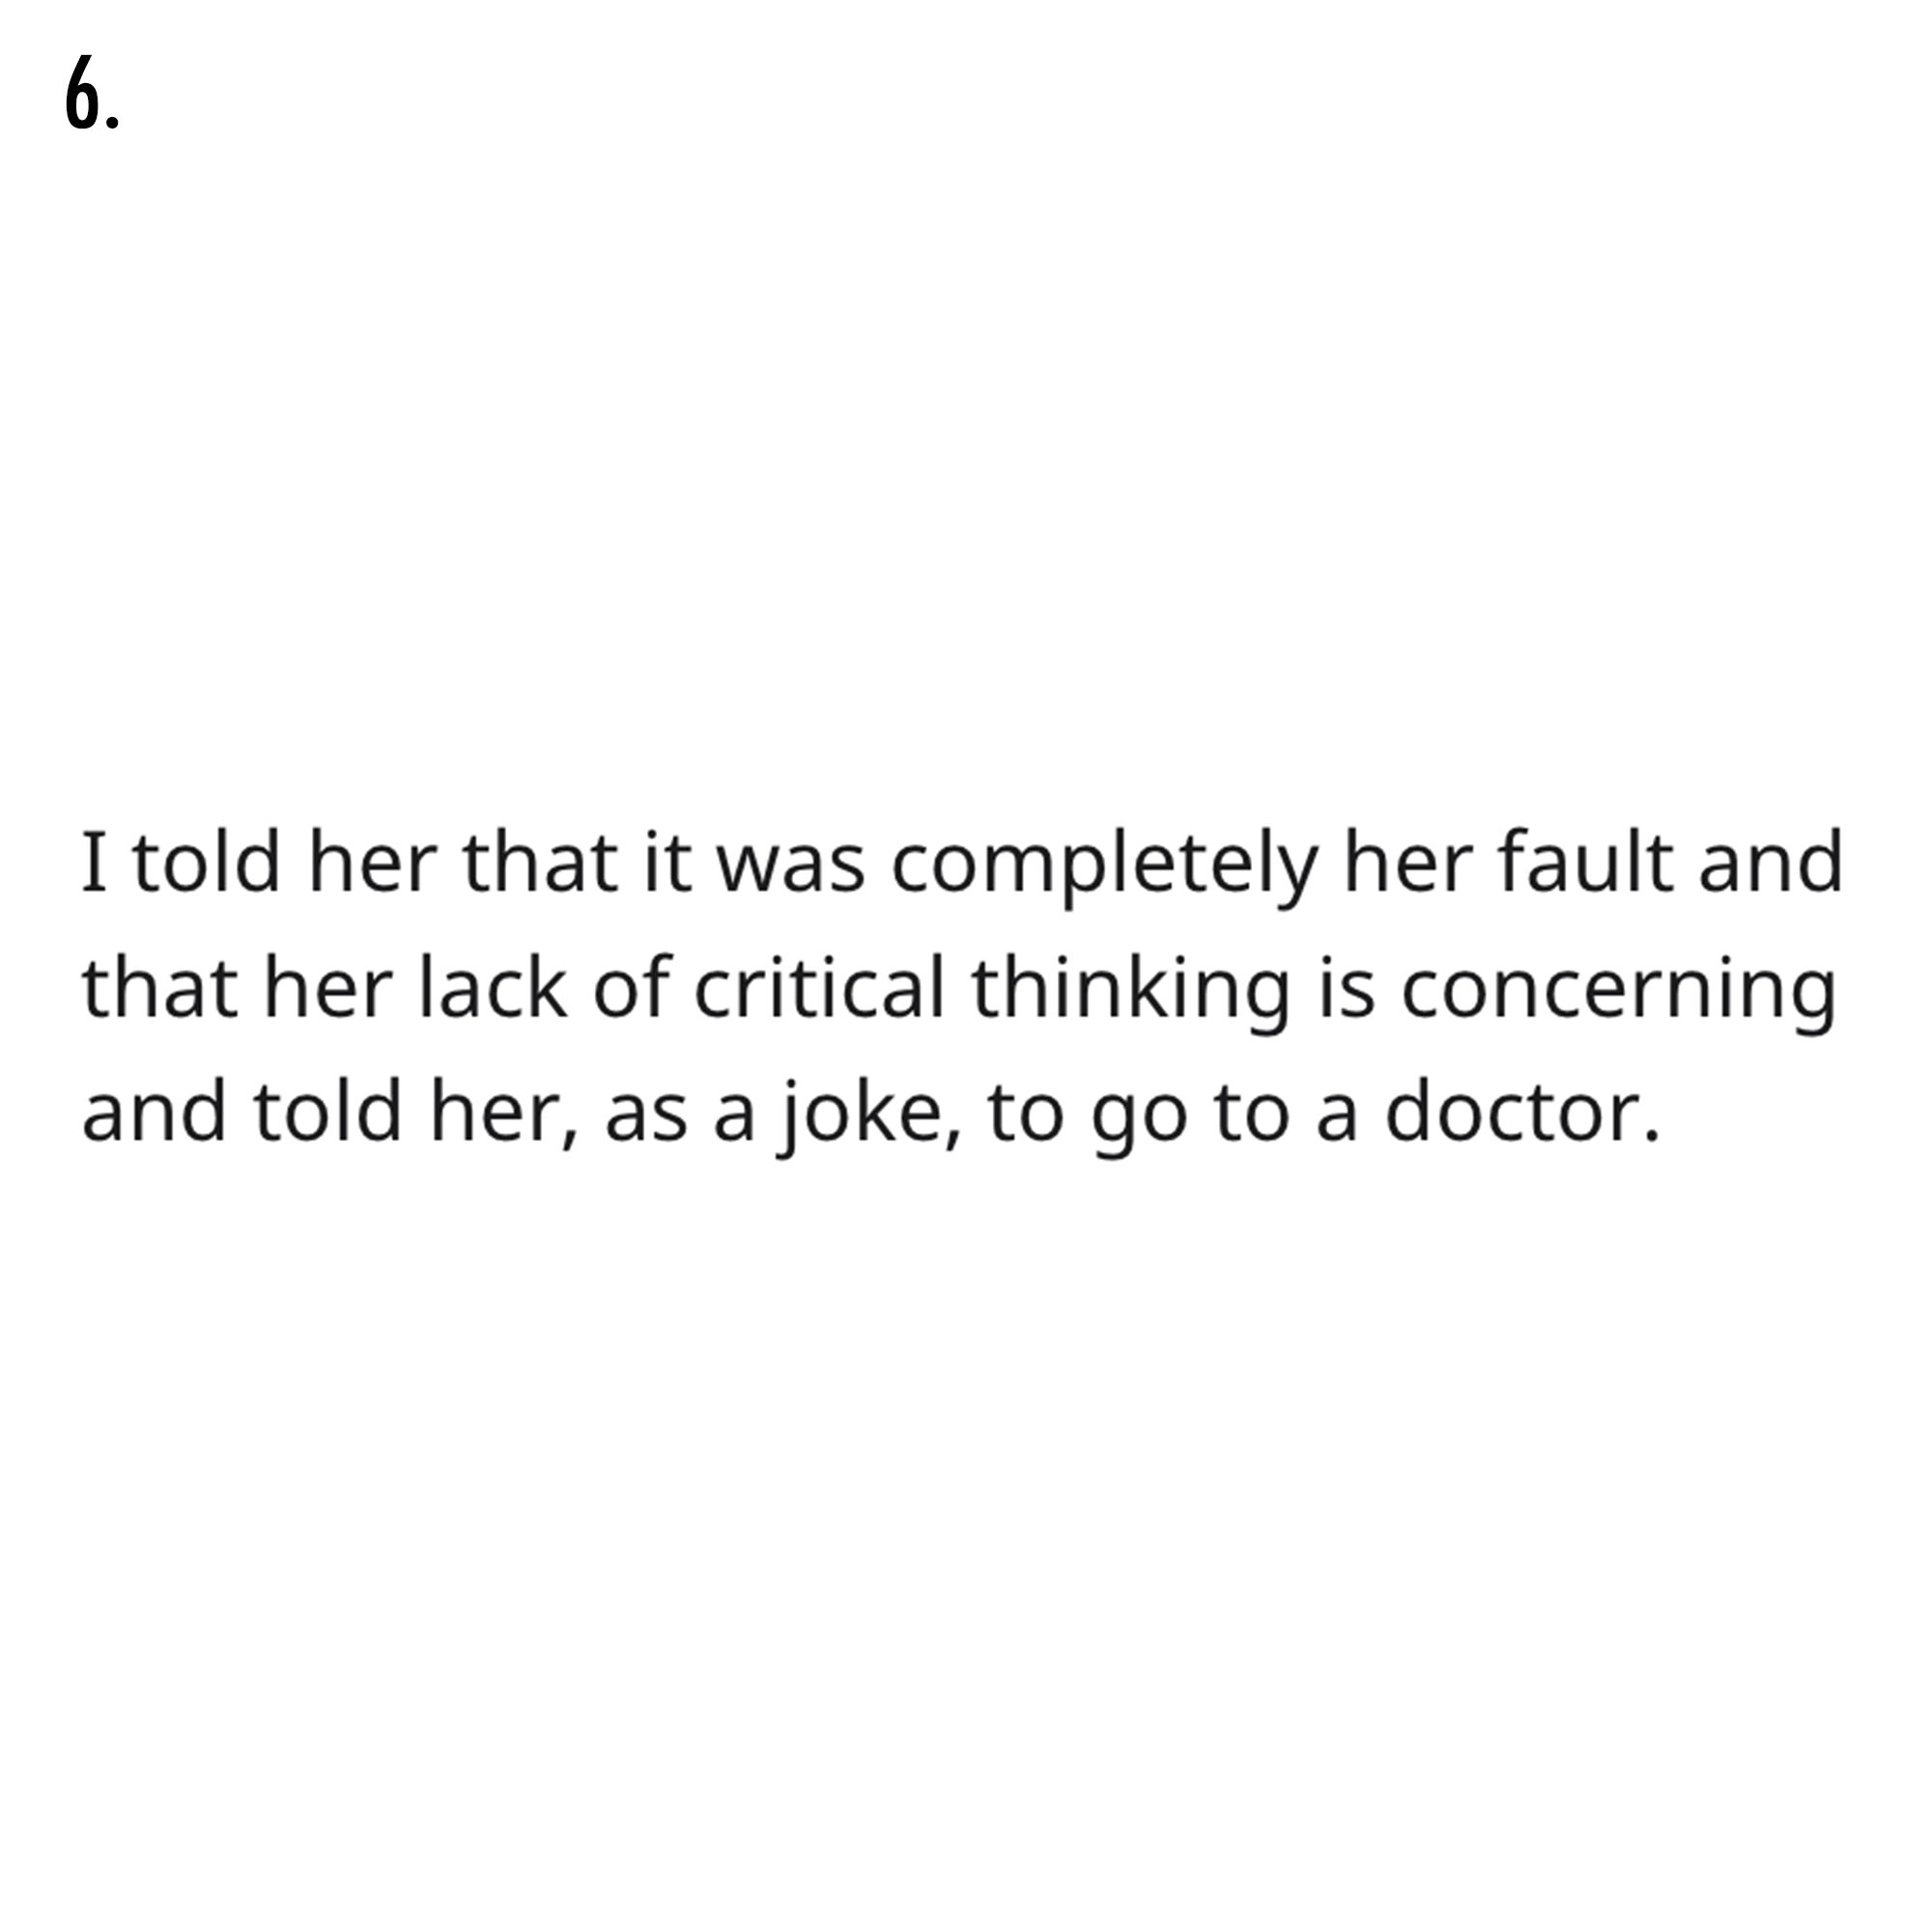 AITA Reddit Story - document - 6. I told her that it was completely her fault and that her lack of critical thinking is concerning and told her, as a joke, to go to a doctor.